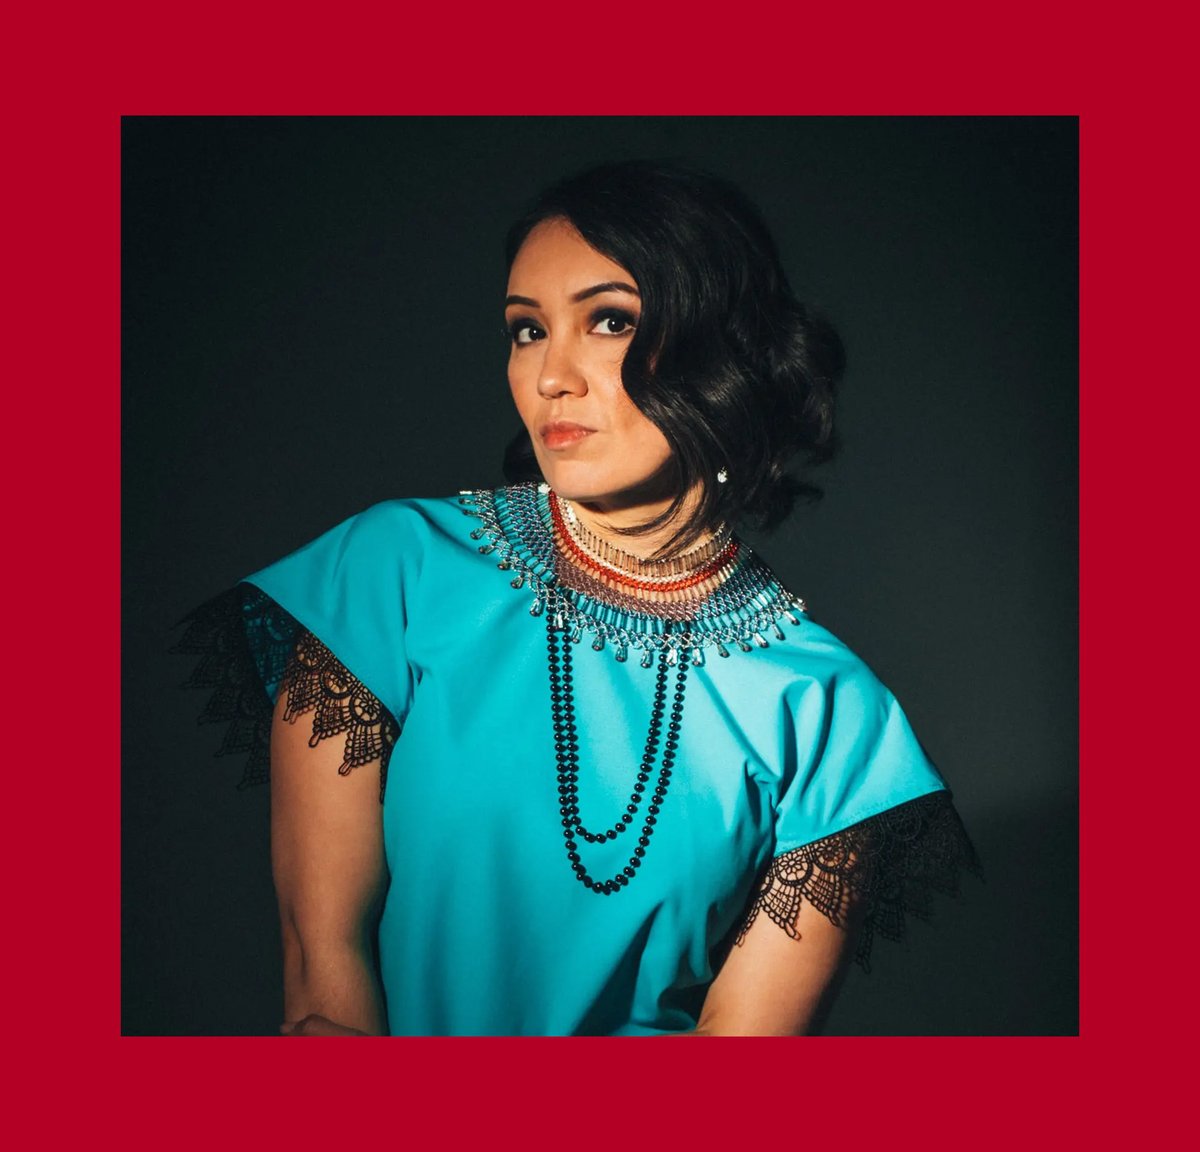 This week's #ArtistOfTheWeek – Beatrice Deer. 

Based in Montreal. Inuk/Mohawk, Beatrice was raised in Nunavik, Quebec.

She has released six albums, including her newest, SHIFTING. Her songs blend indie rock and modern folk with traditional Inuit stories and throat singing.